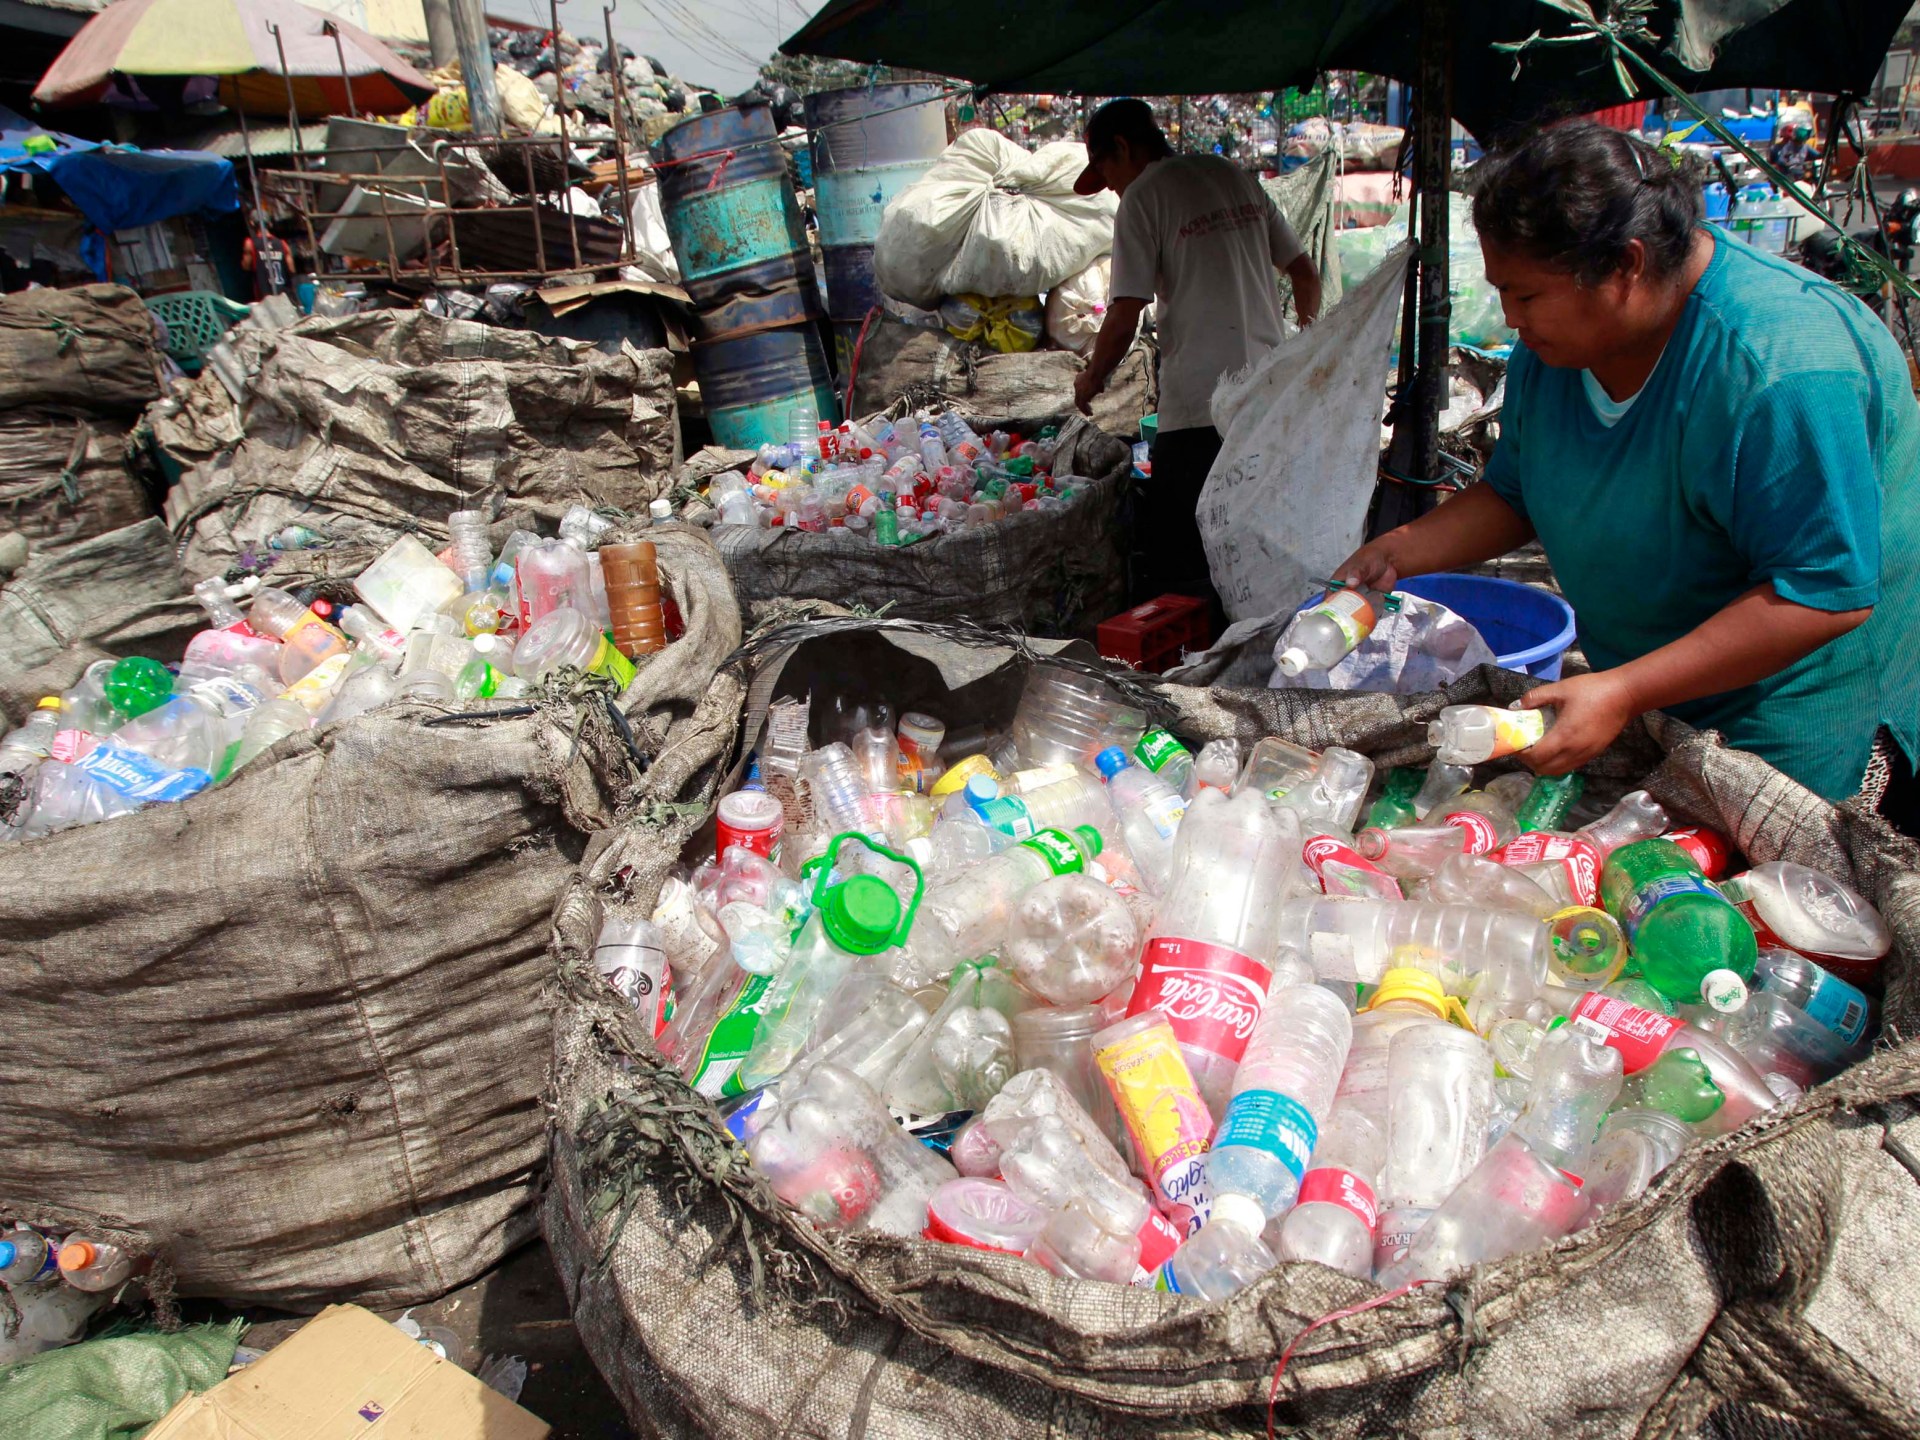 A treaty to finish the age of plastic